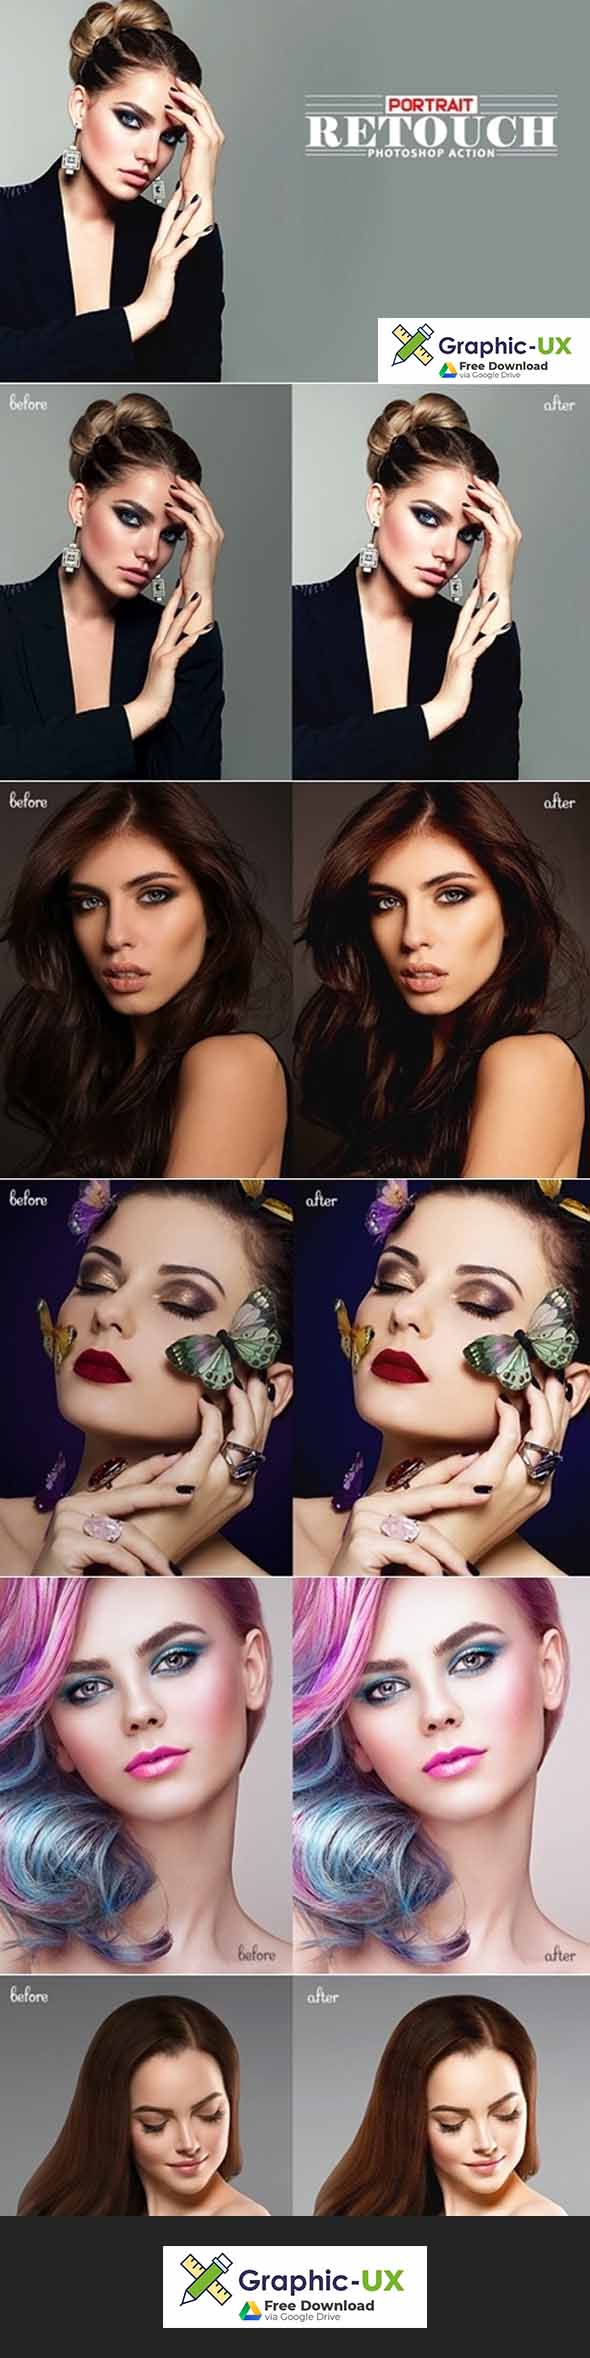 photoshop retouching actions free download